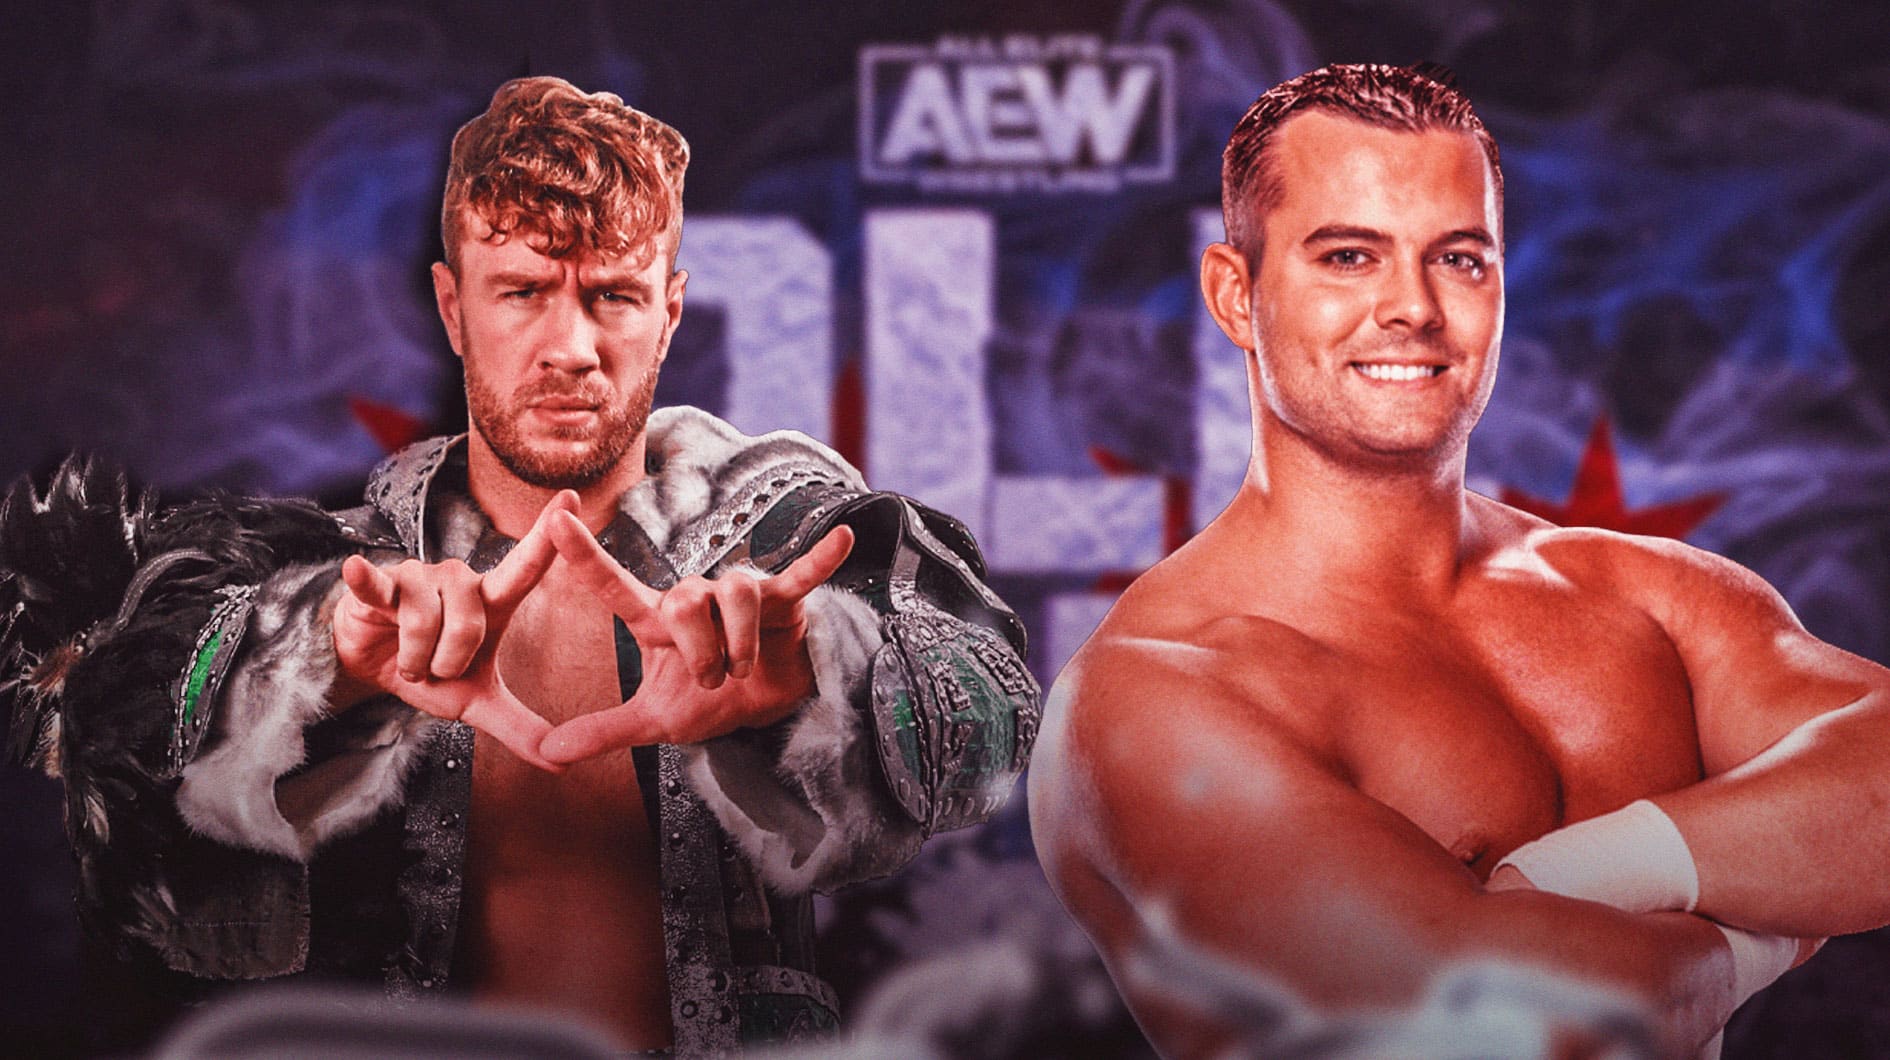 Will Ospreay Can Now Have His British Bulldog Moment At All In Wembley